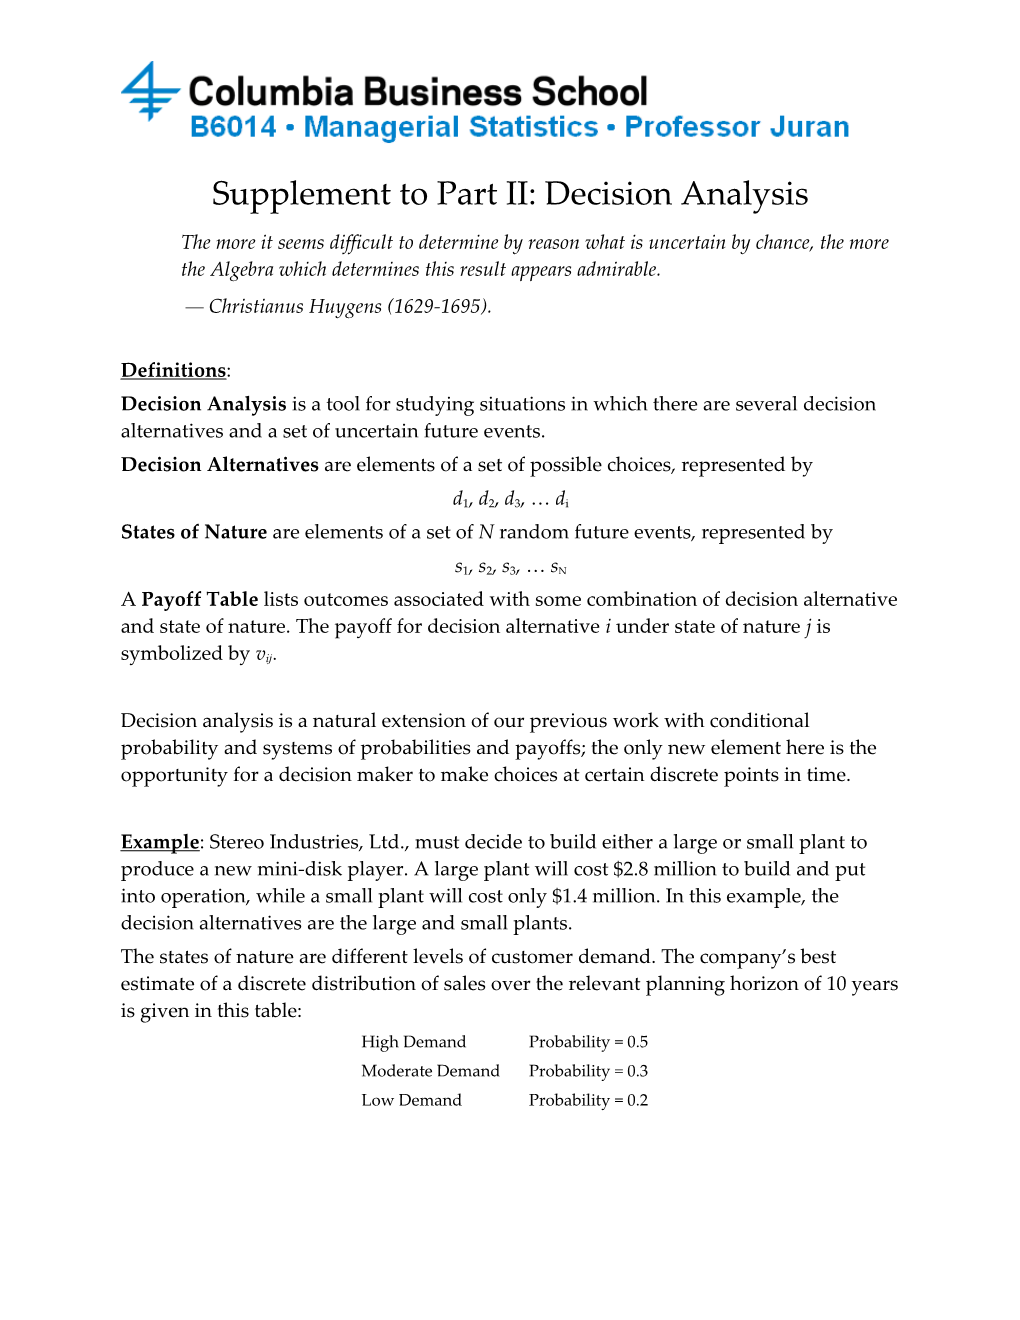 Supplement to Part II: Decision Analysis